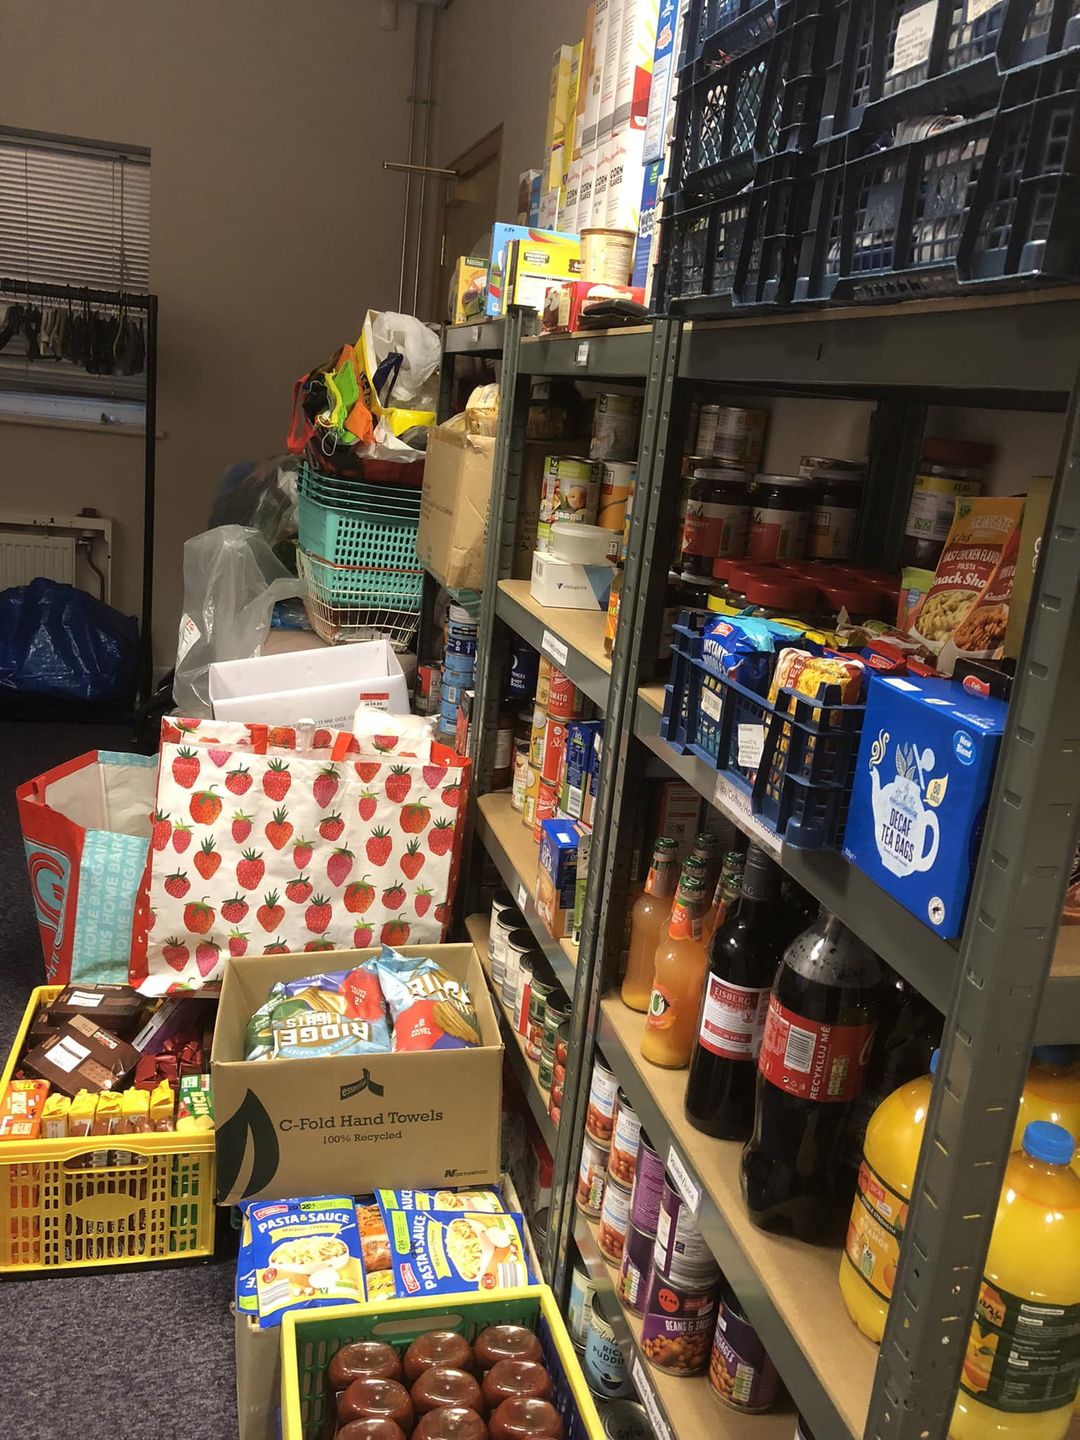 Community pantry shelves stocked after food drive